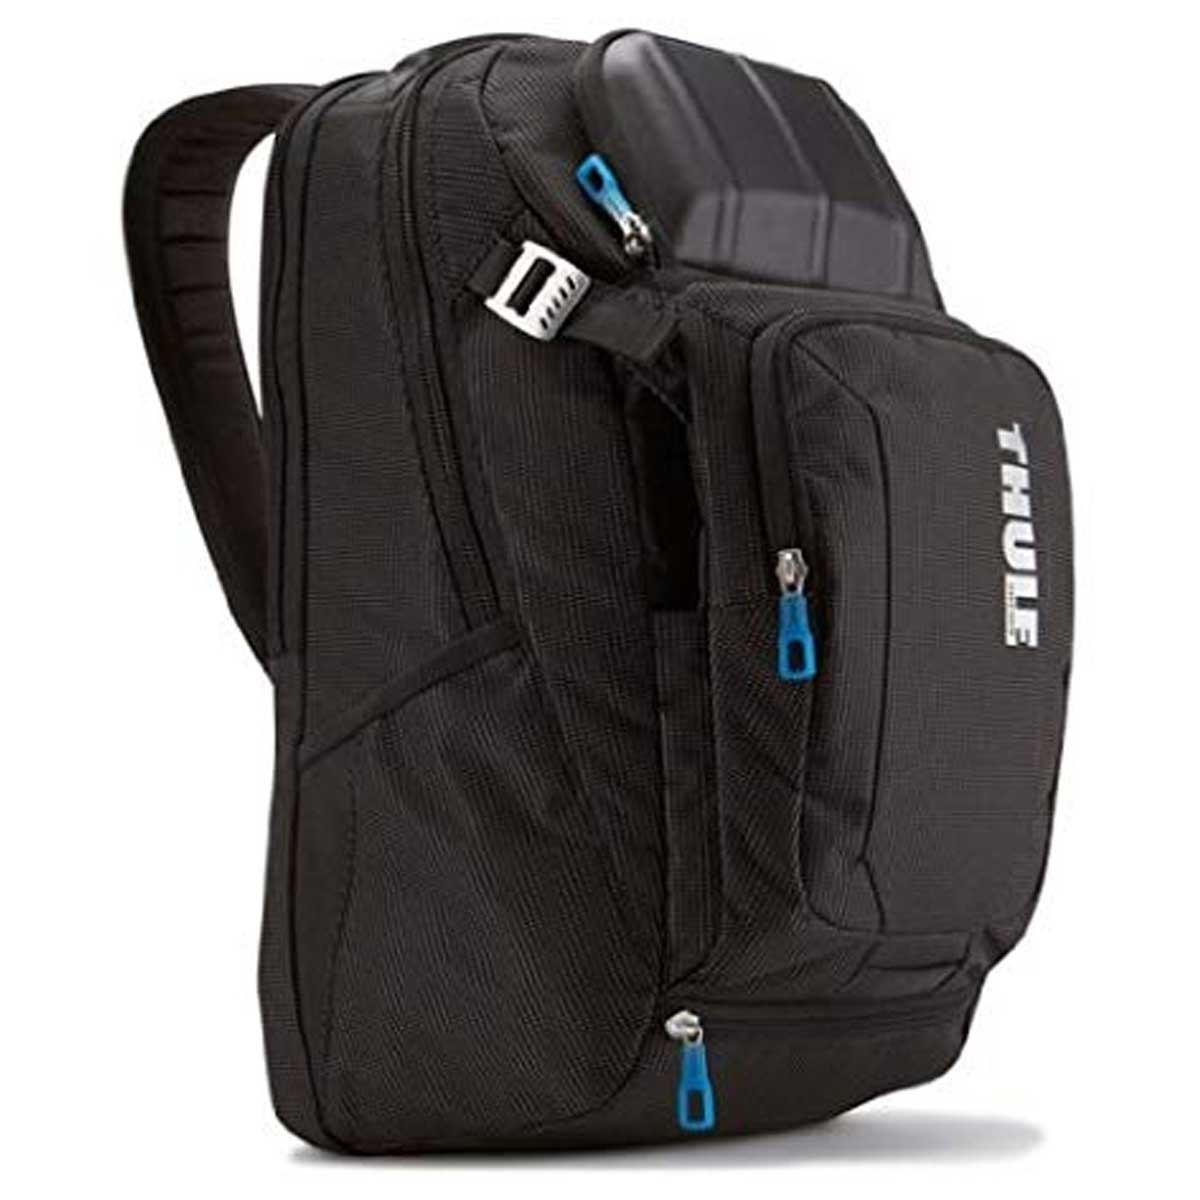 Objector over there at home Thule Crossover 32L Backpack - Official JaYoe website